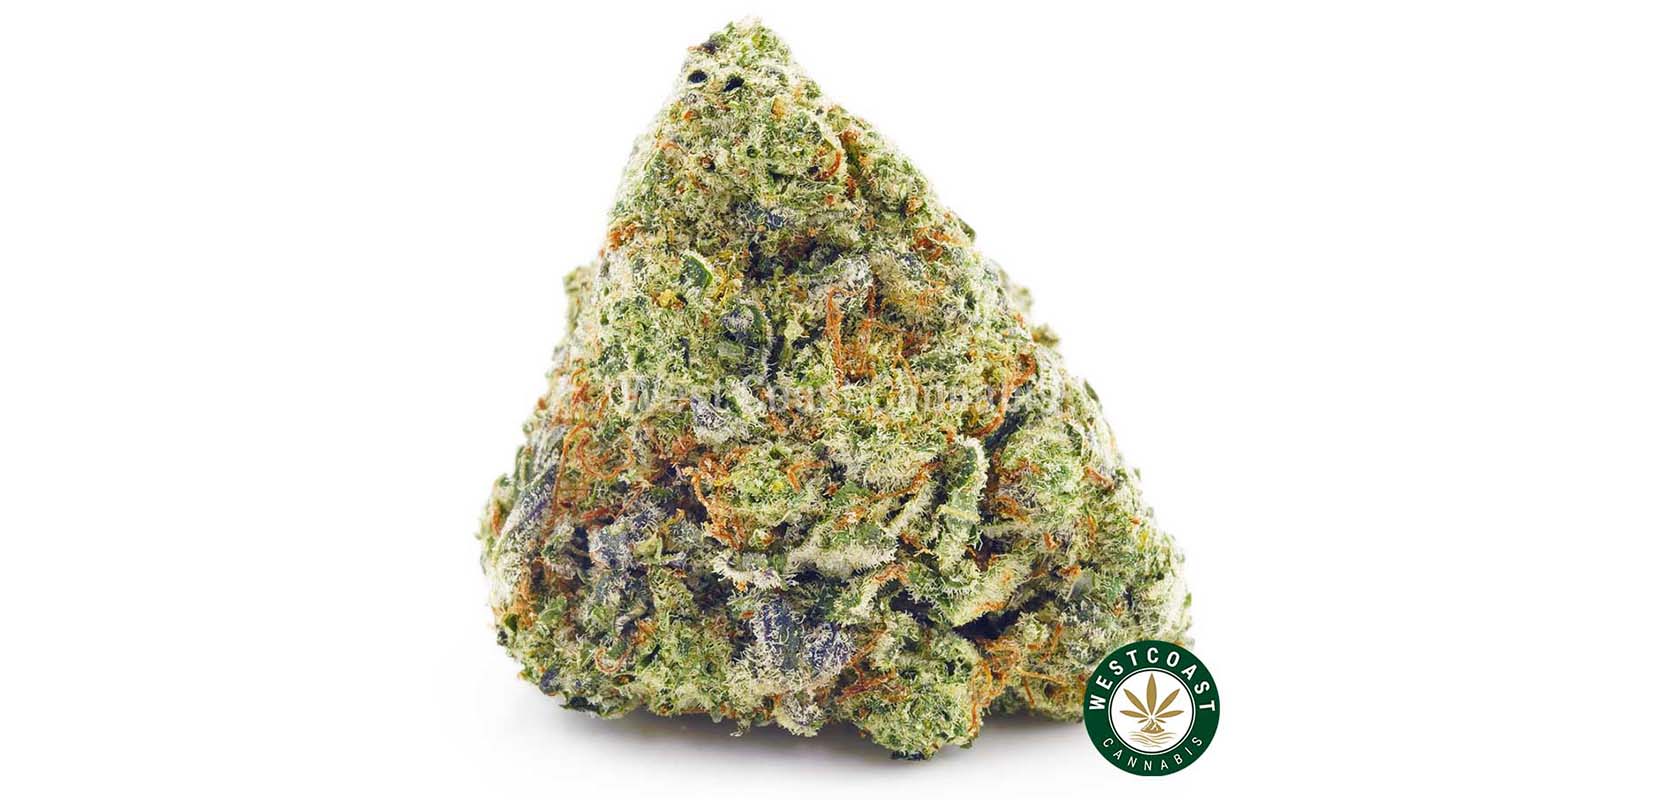 buy fruity pebble weed online in canada. cannabis canada online dispensary mail order maijuana.